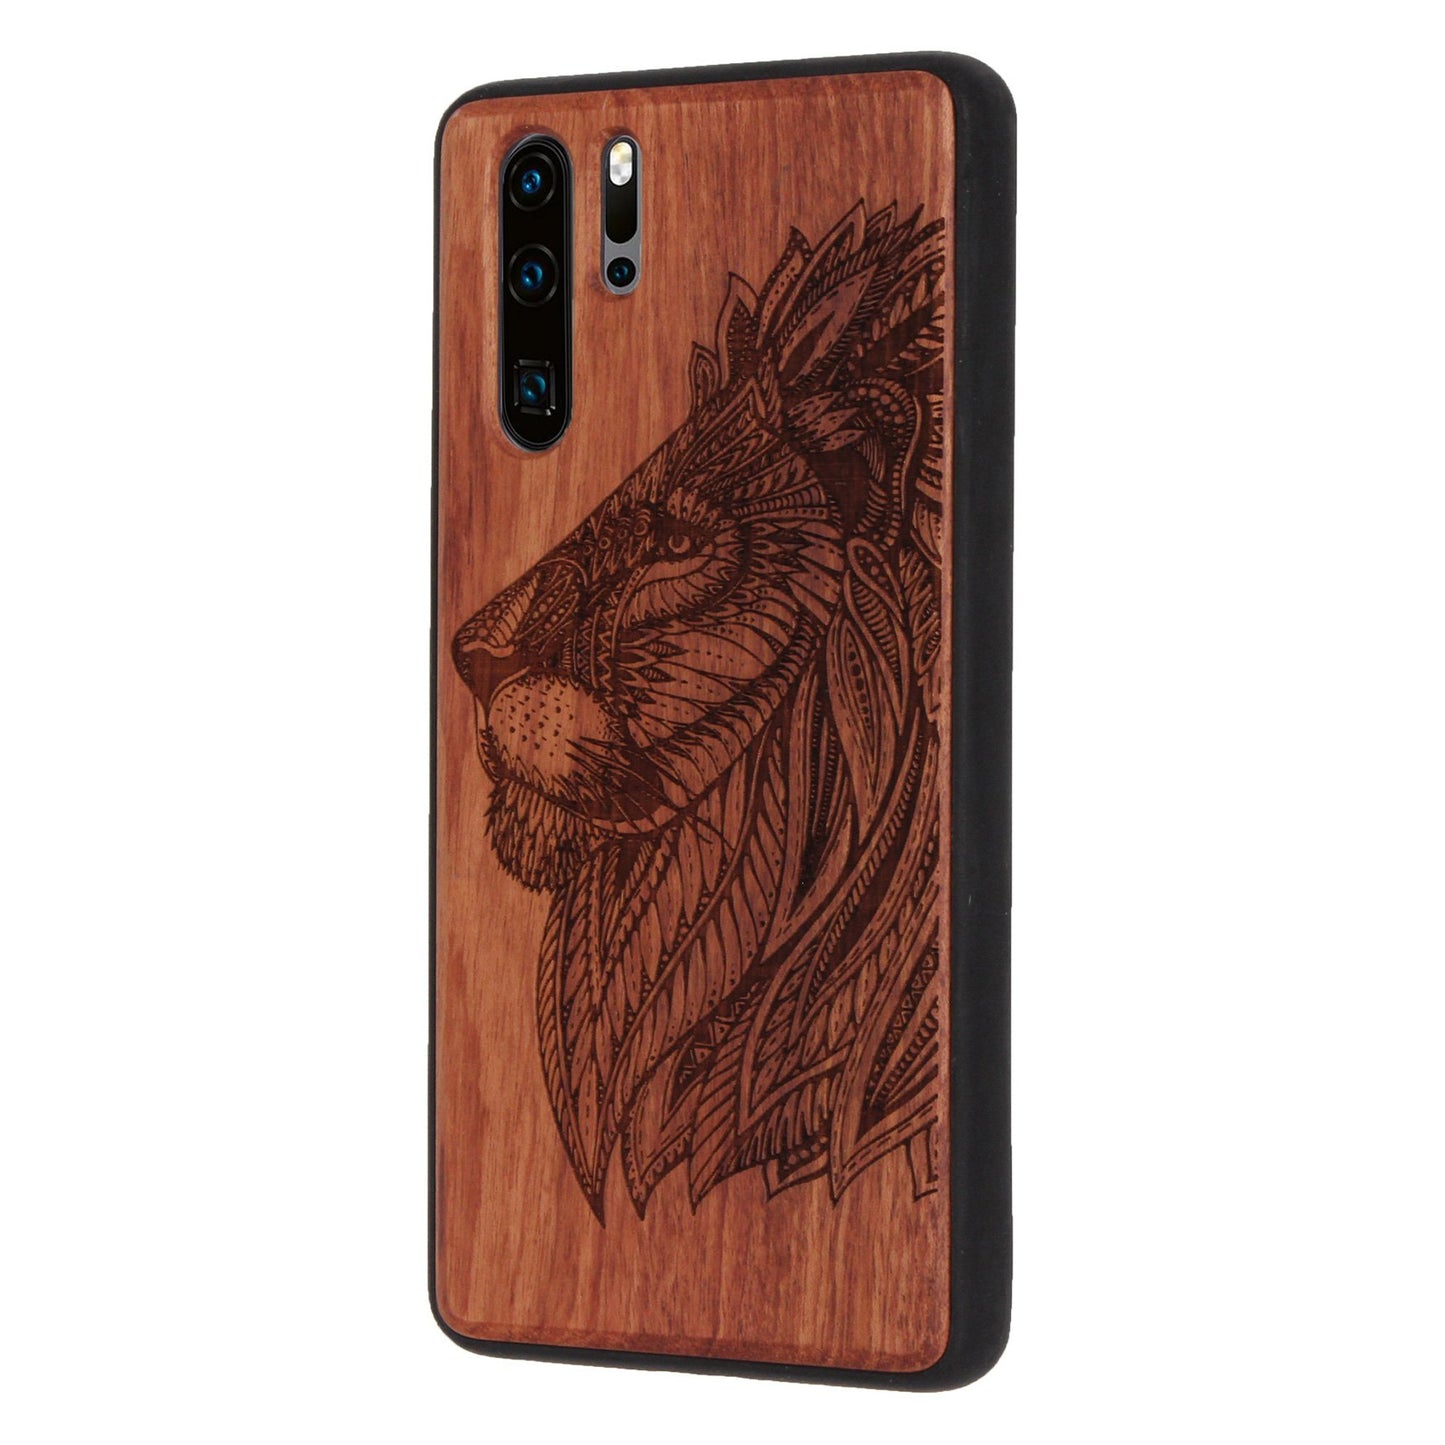 Rosewood Lion Eden Case for Huawei P30 Pro 